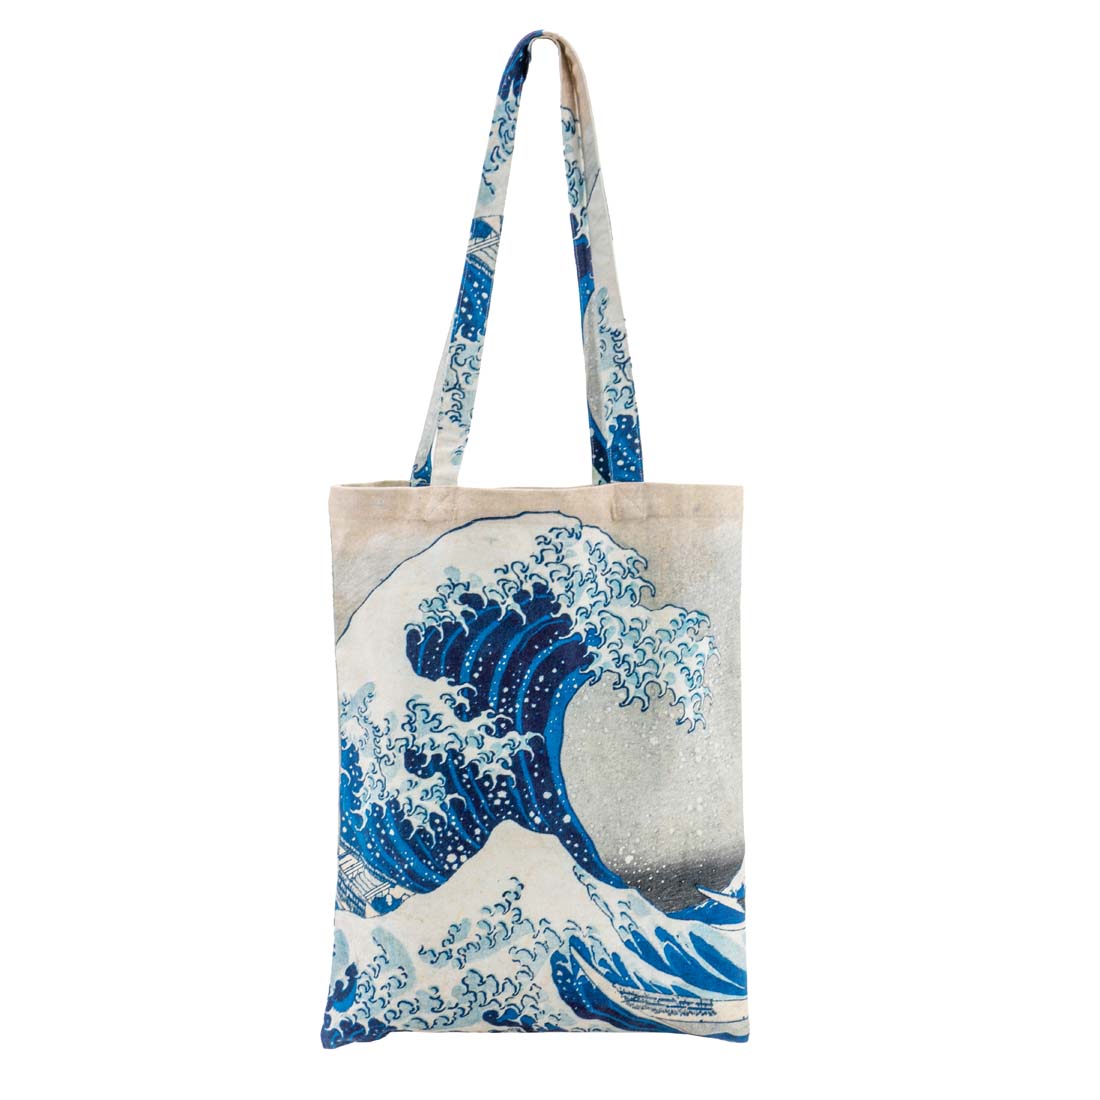 The Great Wave Tote Bag